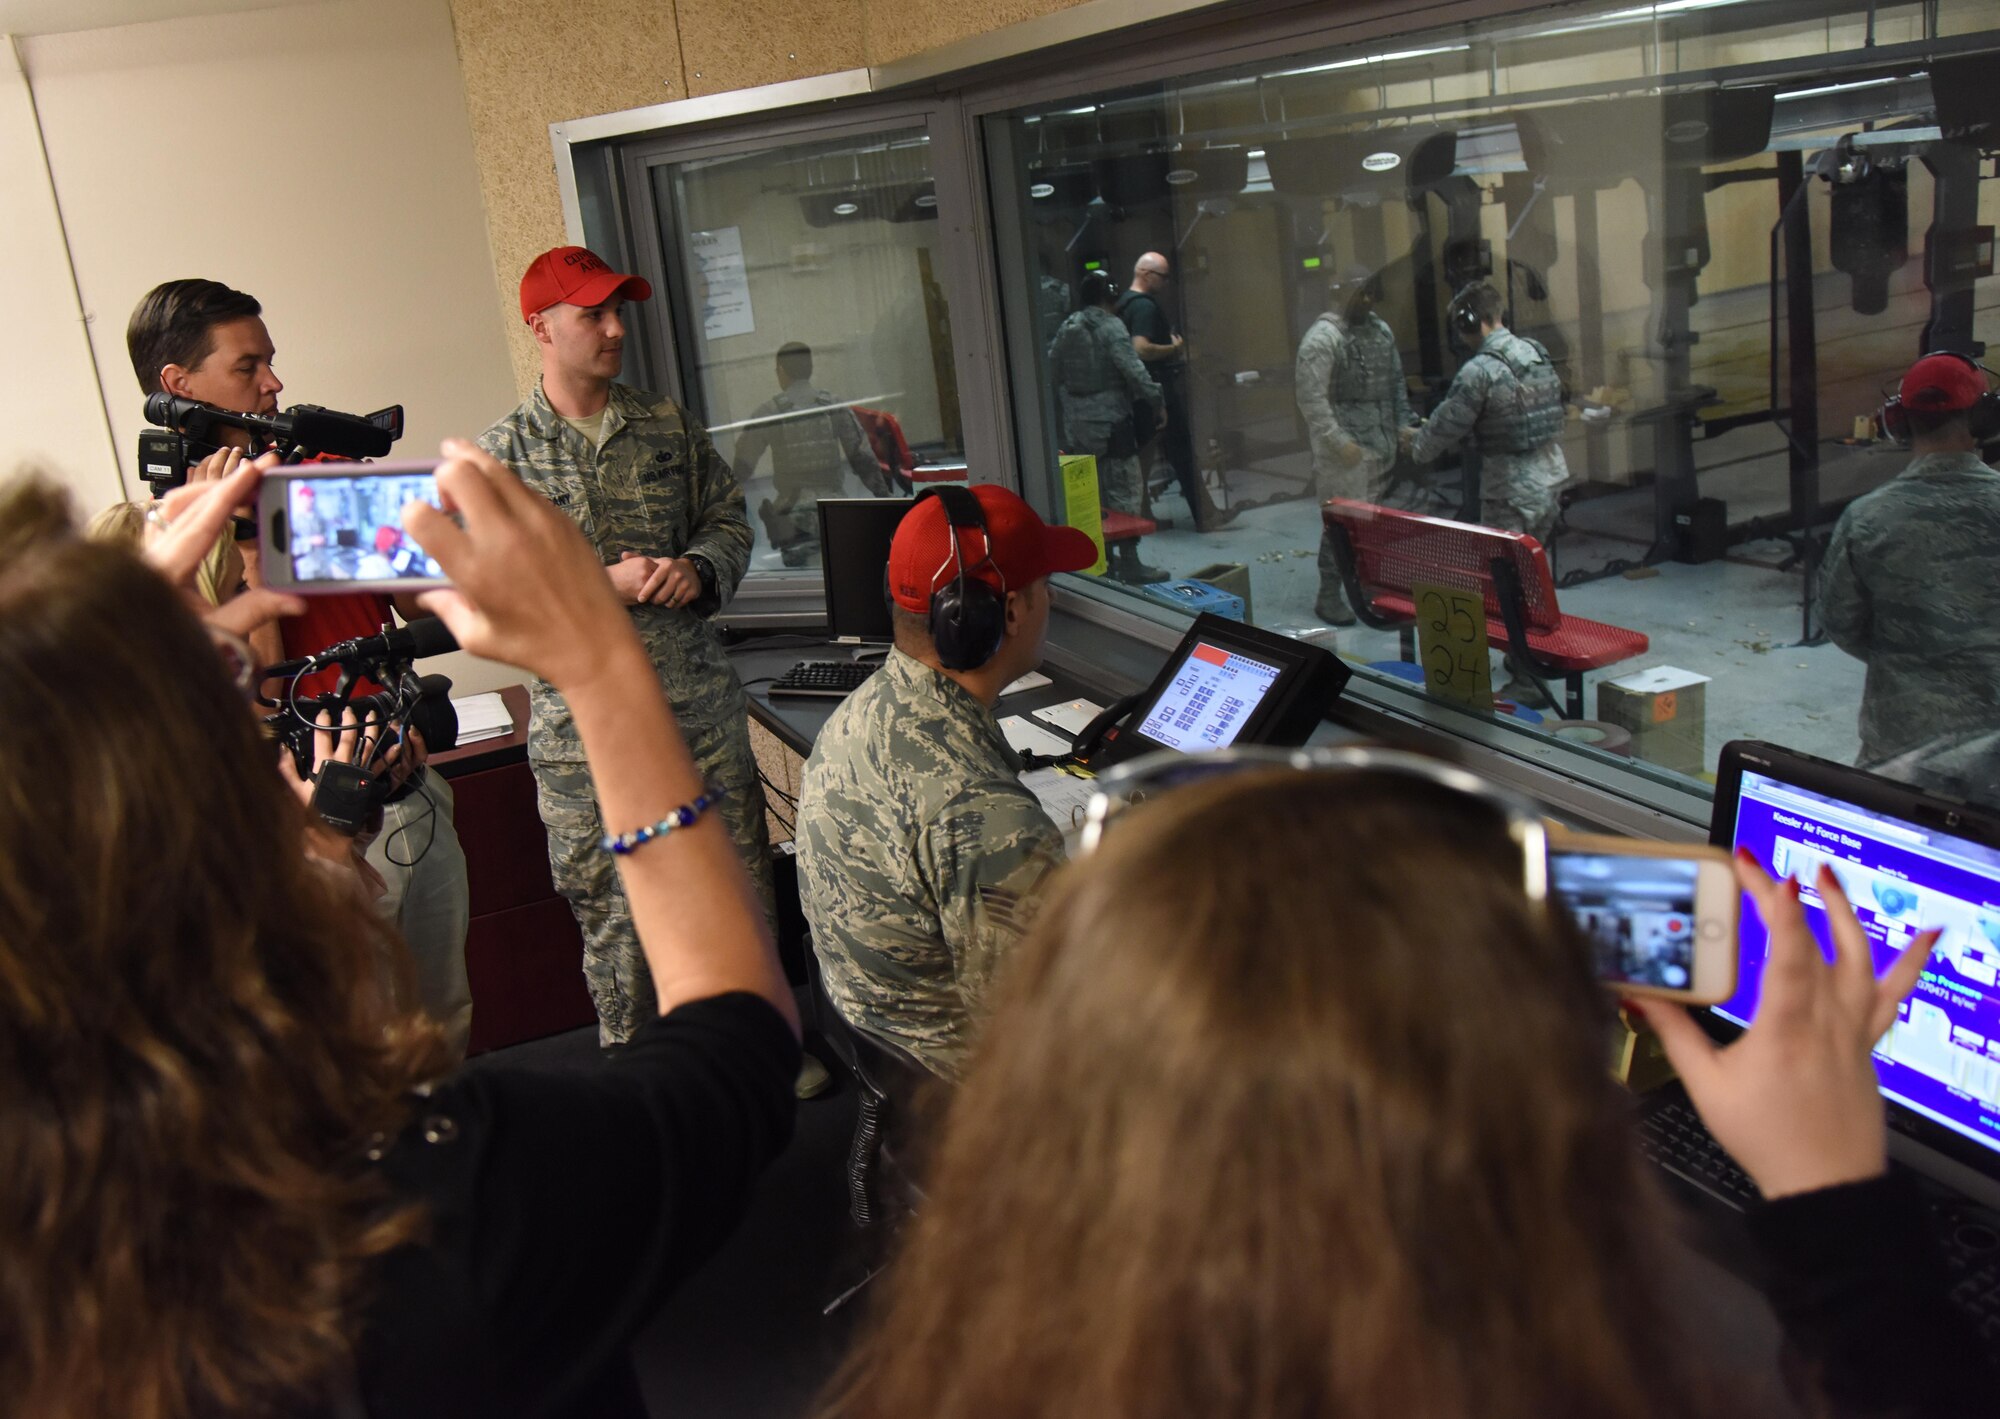 Reporters from local media outlets tour the 81st Security Forces Squadron indoor firing range during Media Day Oct. 26, 2017, on Keesler Air Force Base, Mississippi. In order to better understand Keesler’s mission, the reporters also toured the air traffic control tower, the Keesler Medical Center and a 333rd Training Squadron cyber training course. (U.S. Air Force photo by Kemberly Groue)